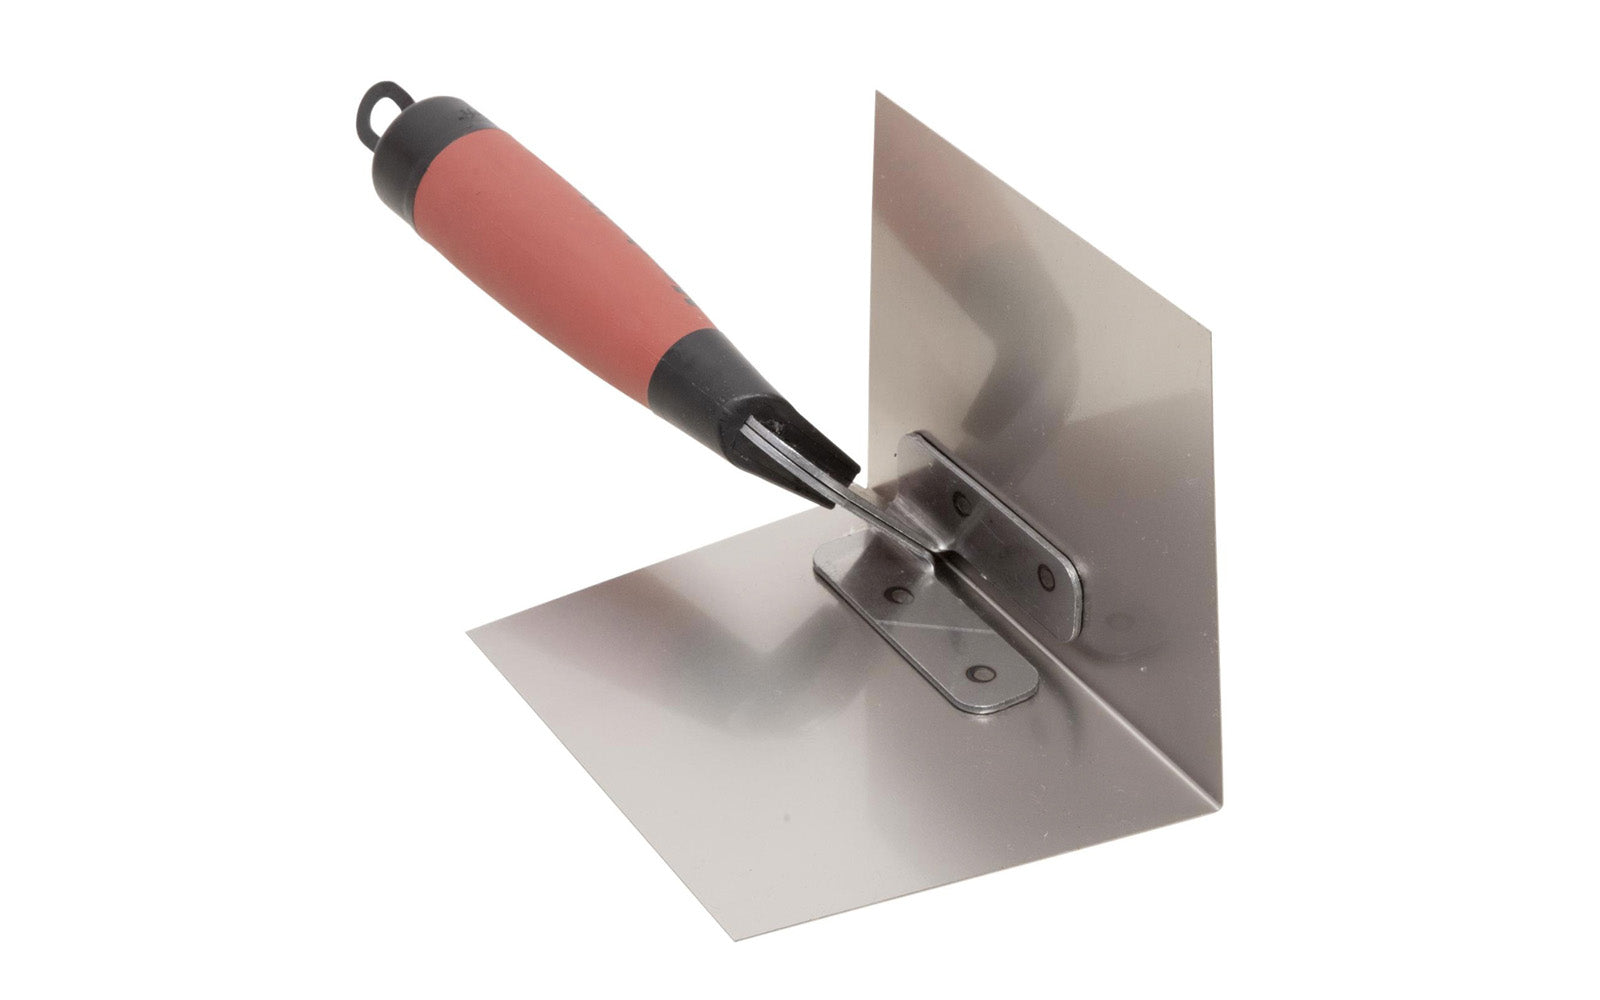 Marshalltown 5" x 3-1/2" Inside Corner Trowel. This Marshalltown Thin Coat Inside Corner Trowel is ideal for smoothing out the final layer of mud or plaster in taped corners, helping you achieve perfect 90° inside corners. Model 24D ~ 035965053242